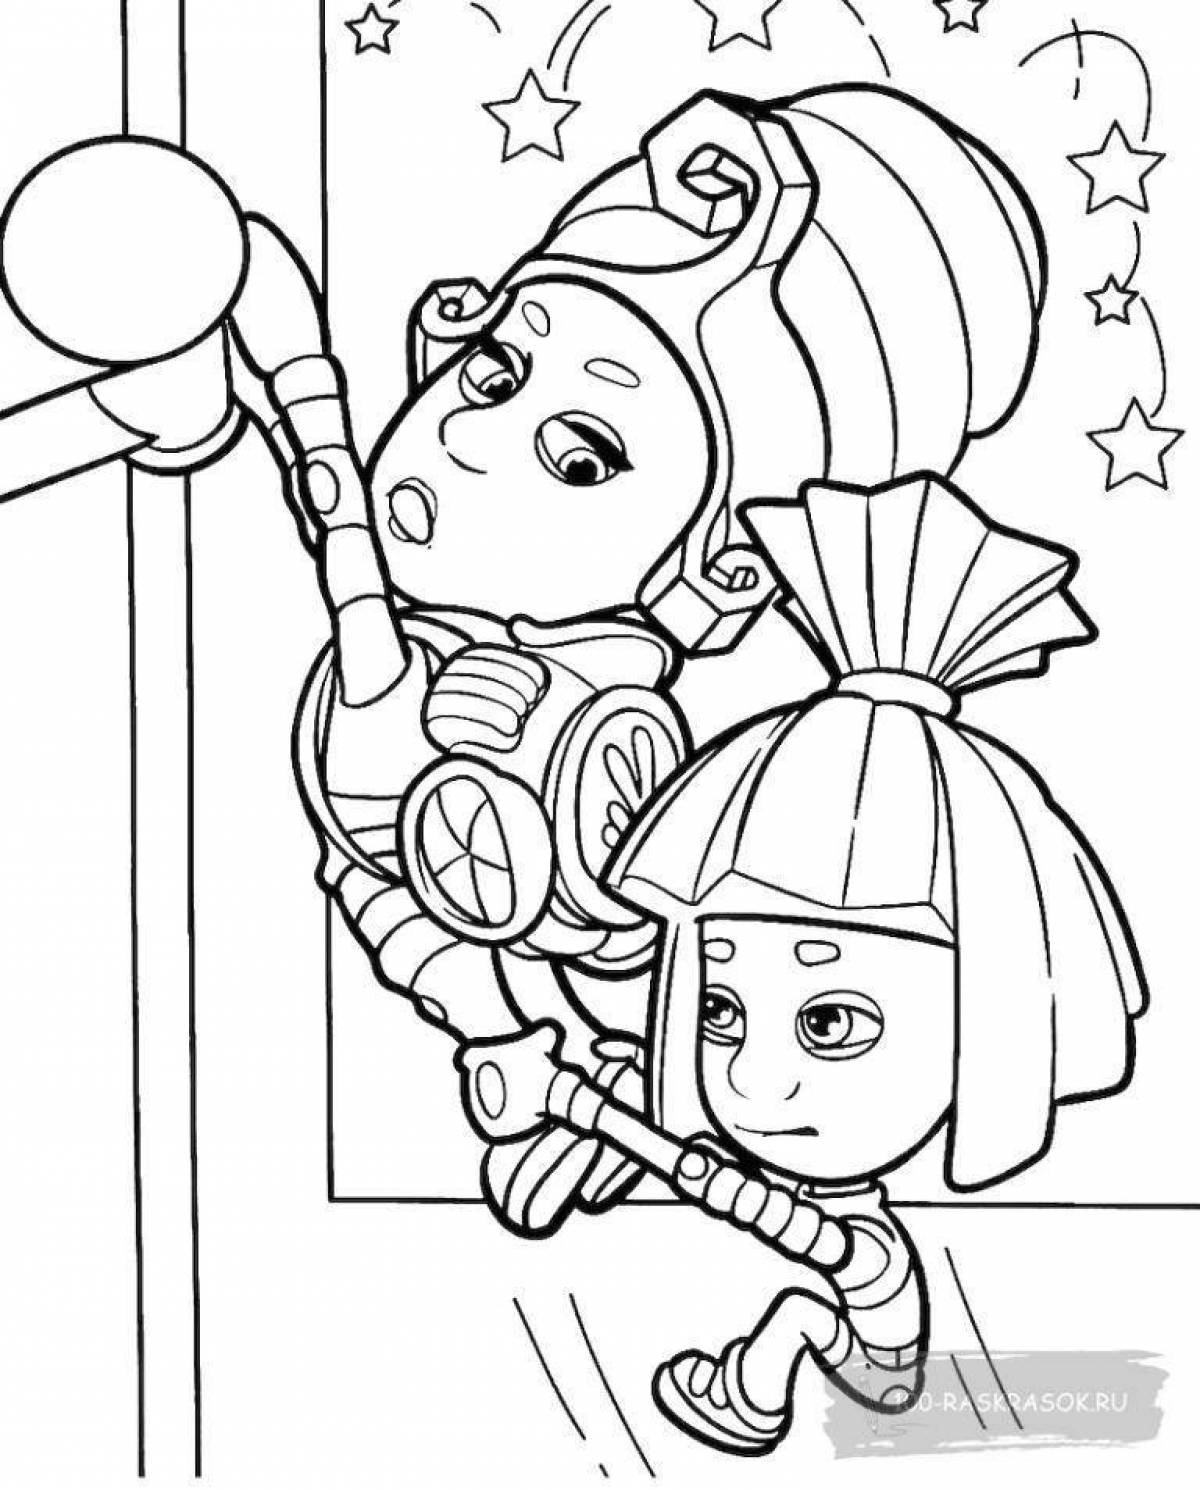 Fun fixies coloring book for the little ones